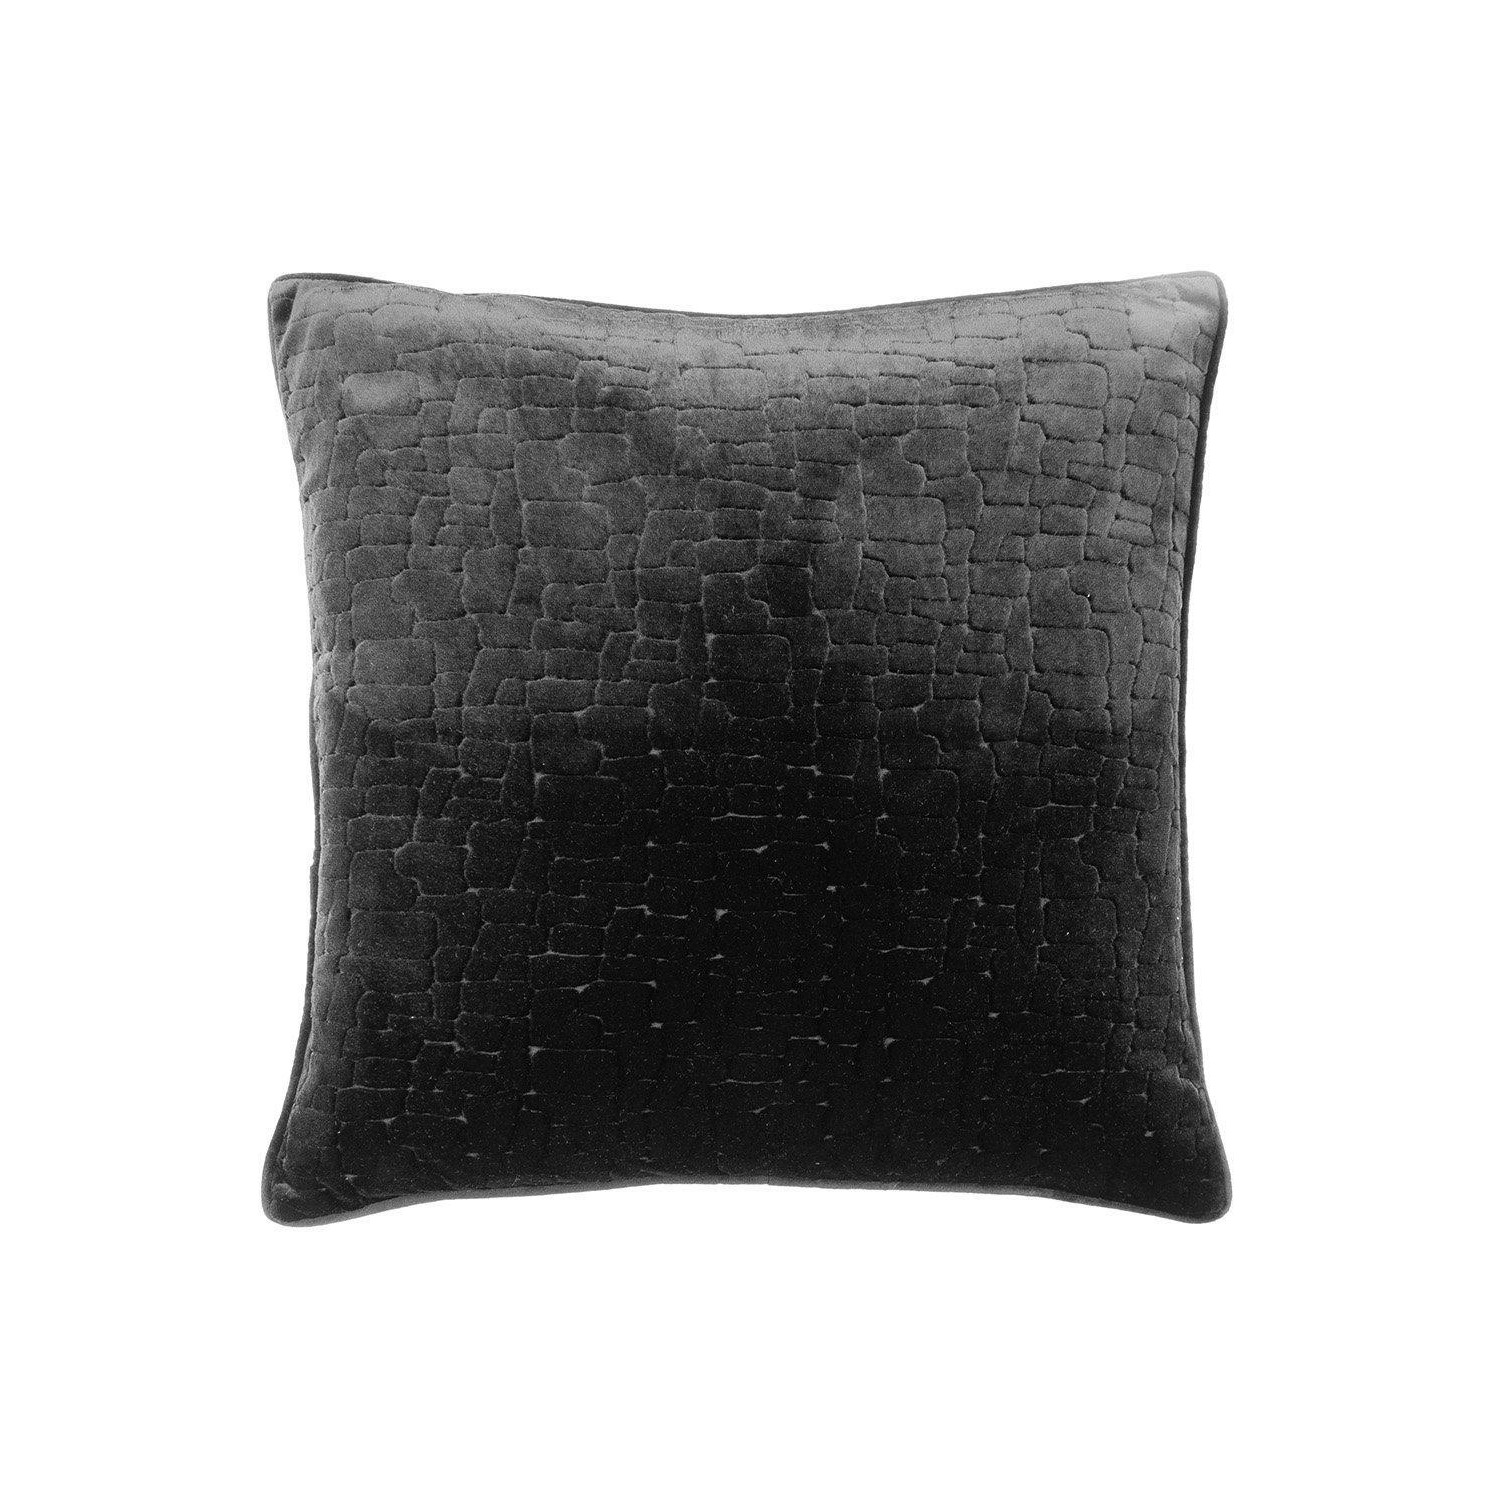 Bloomsbury Soft Cut Velvet Piped Cushion - image 1